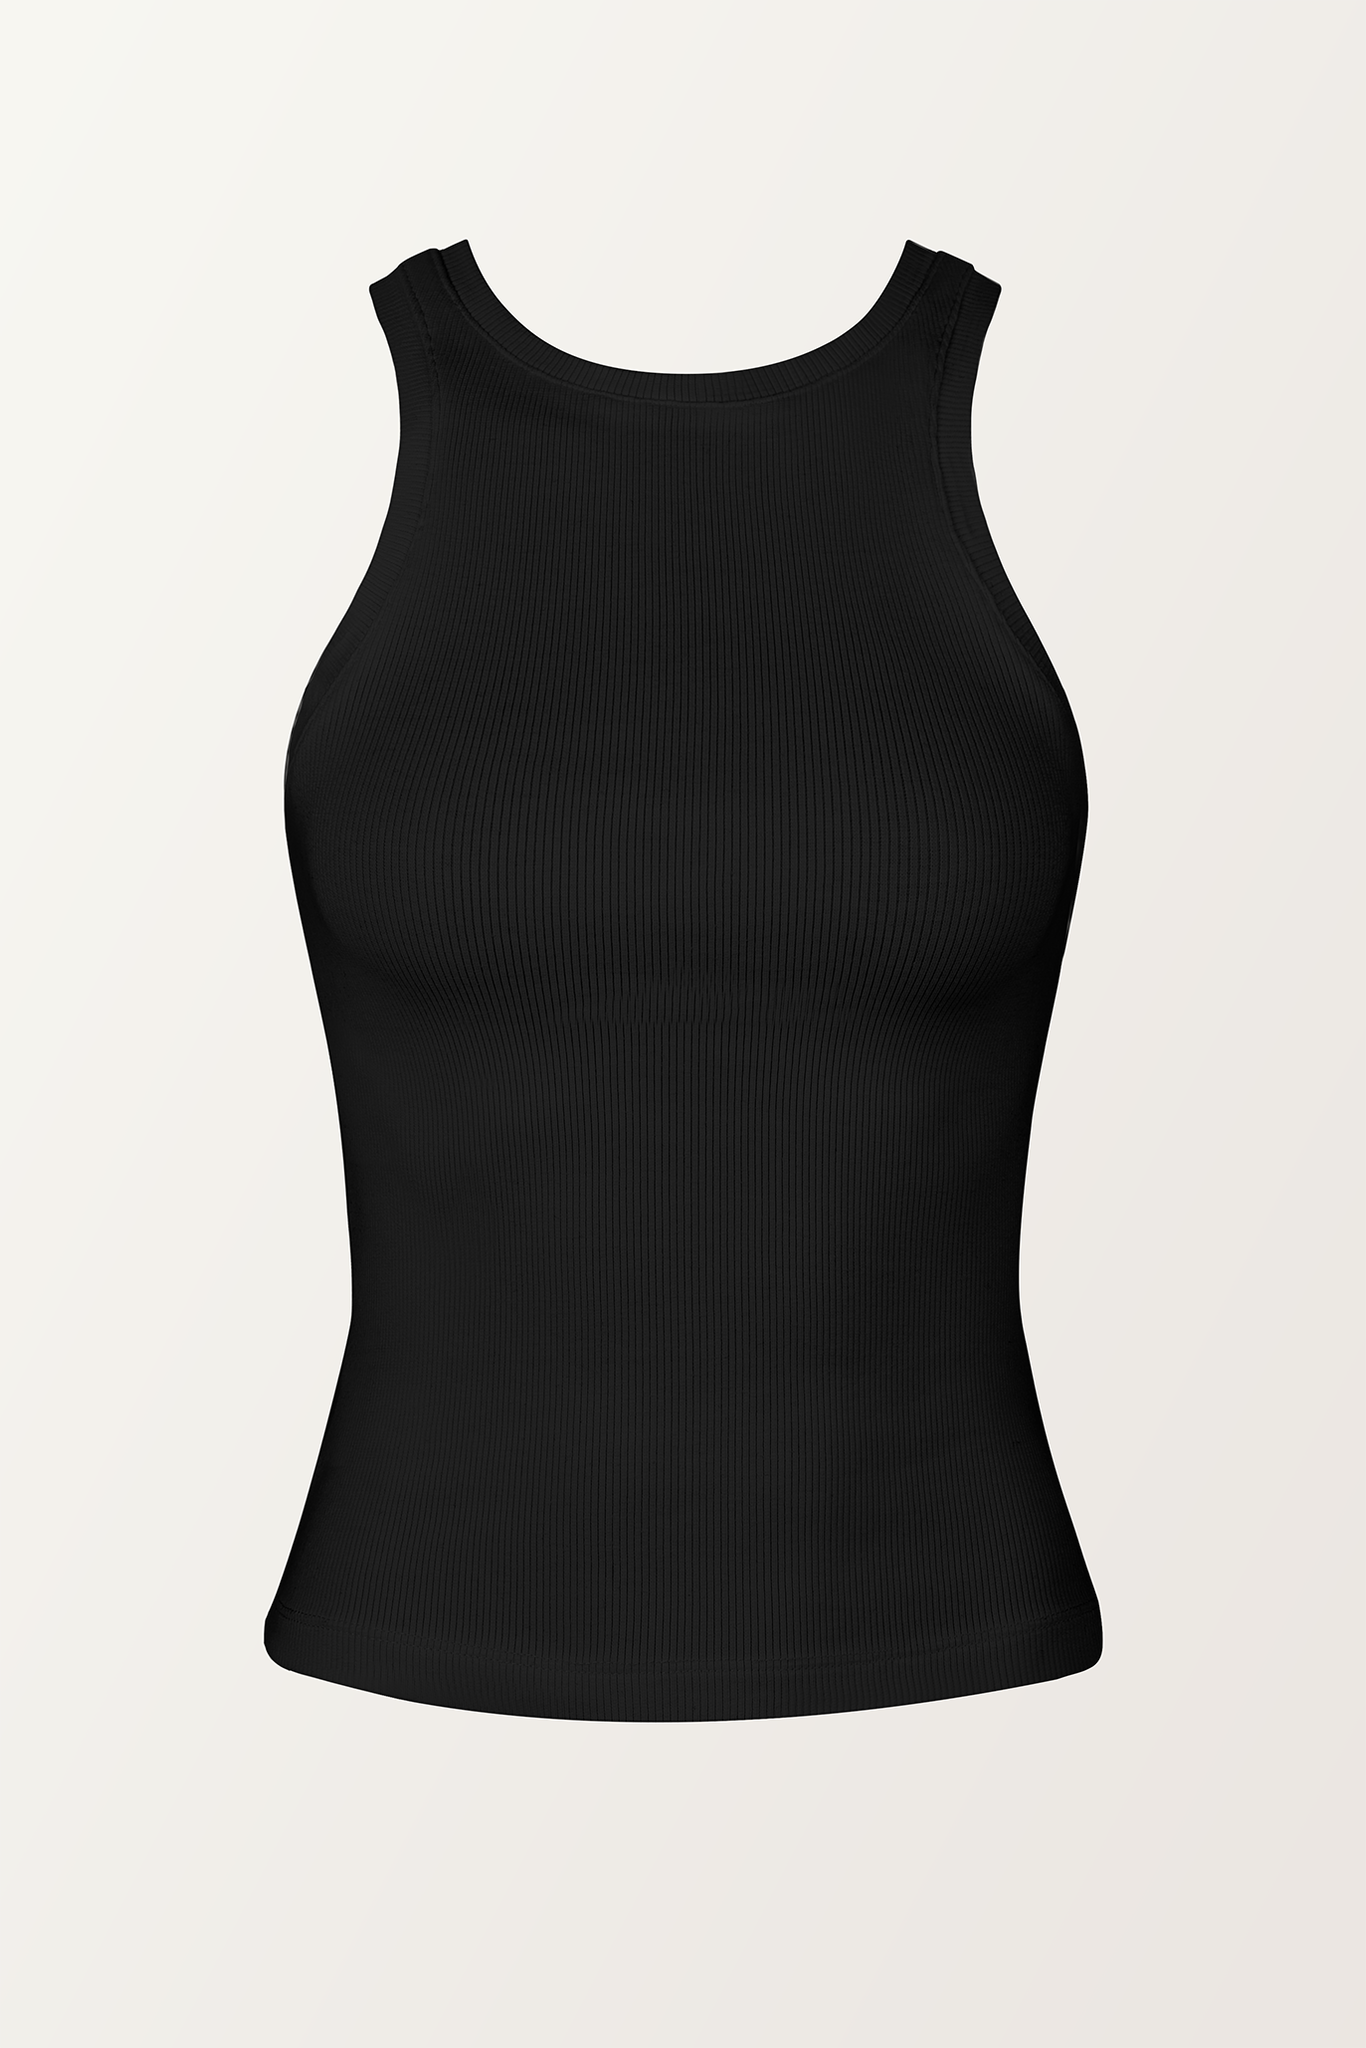 PIXIE WON'T PLAY LARA TANK TOP RIBBED BLACK ORGANIC COTTON SUSTAINABLE FASHION WEAR WITHOUT BRA LUXURY SLEEVELESS STYLISH COMFORTABLE BREATHABLE FABRIC VERSATILE RELAXED FIT SOFT TRENDY SUMMER AUTUMN WINTER SPRING WEAR CASUAL OUTFIT WORKOUT LAYERING VARIOUS COLORS FASHIONABLE MUST-HAVE